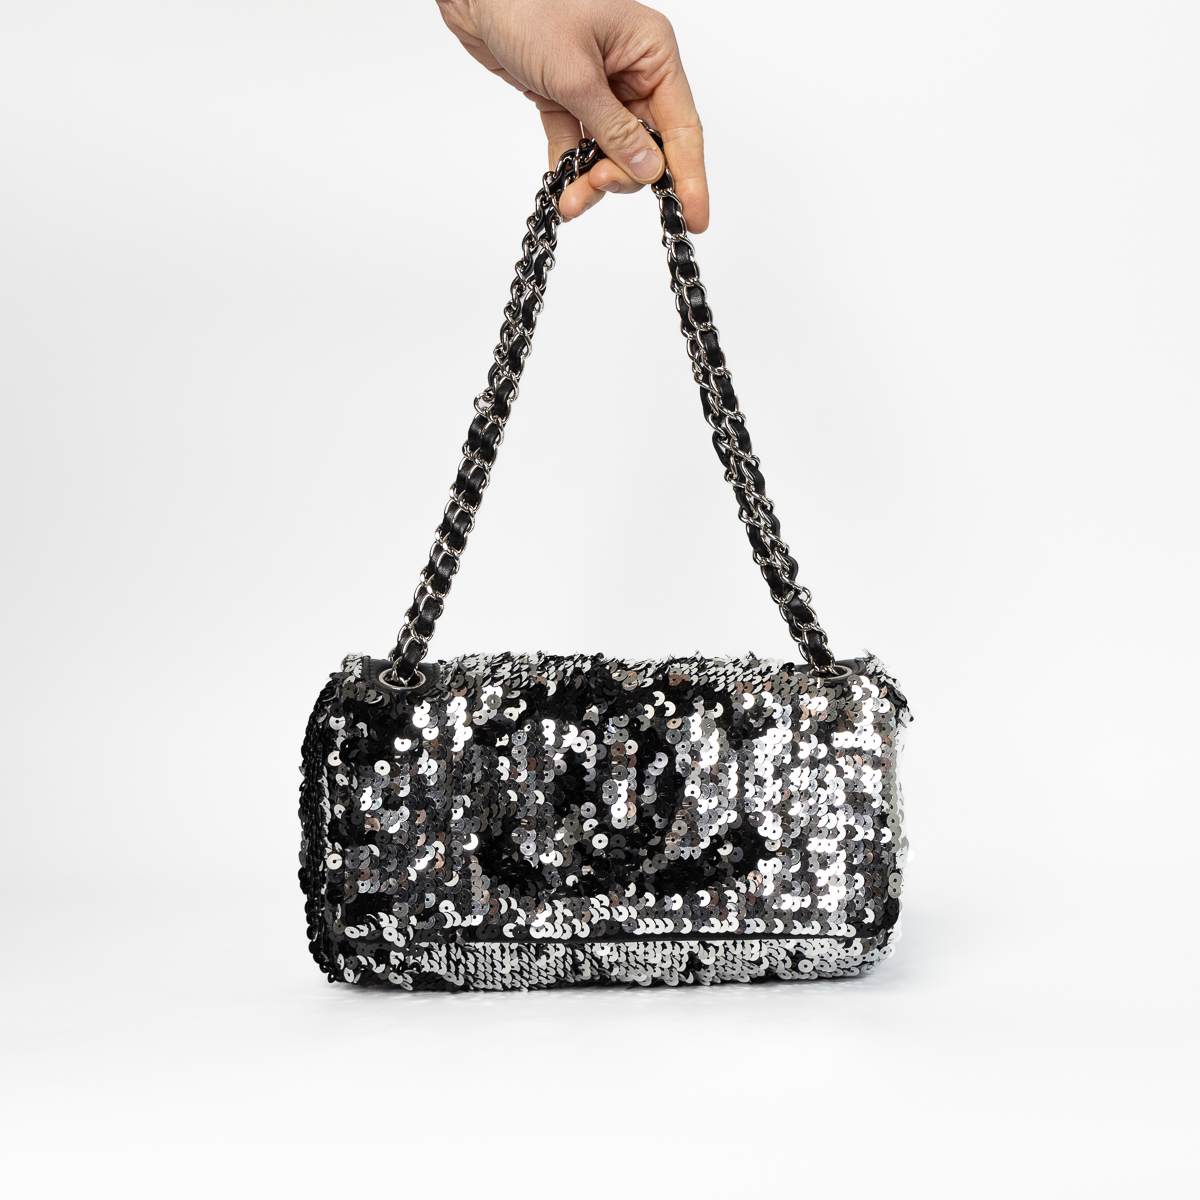 Chanel Sequin Single Flap Bag Black and Silver Limited Edition